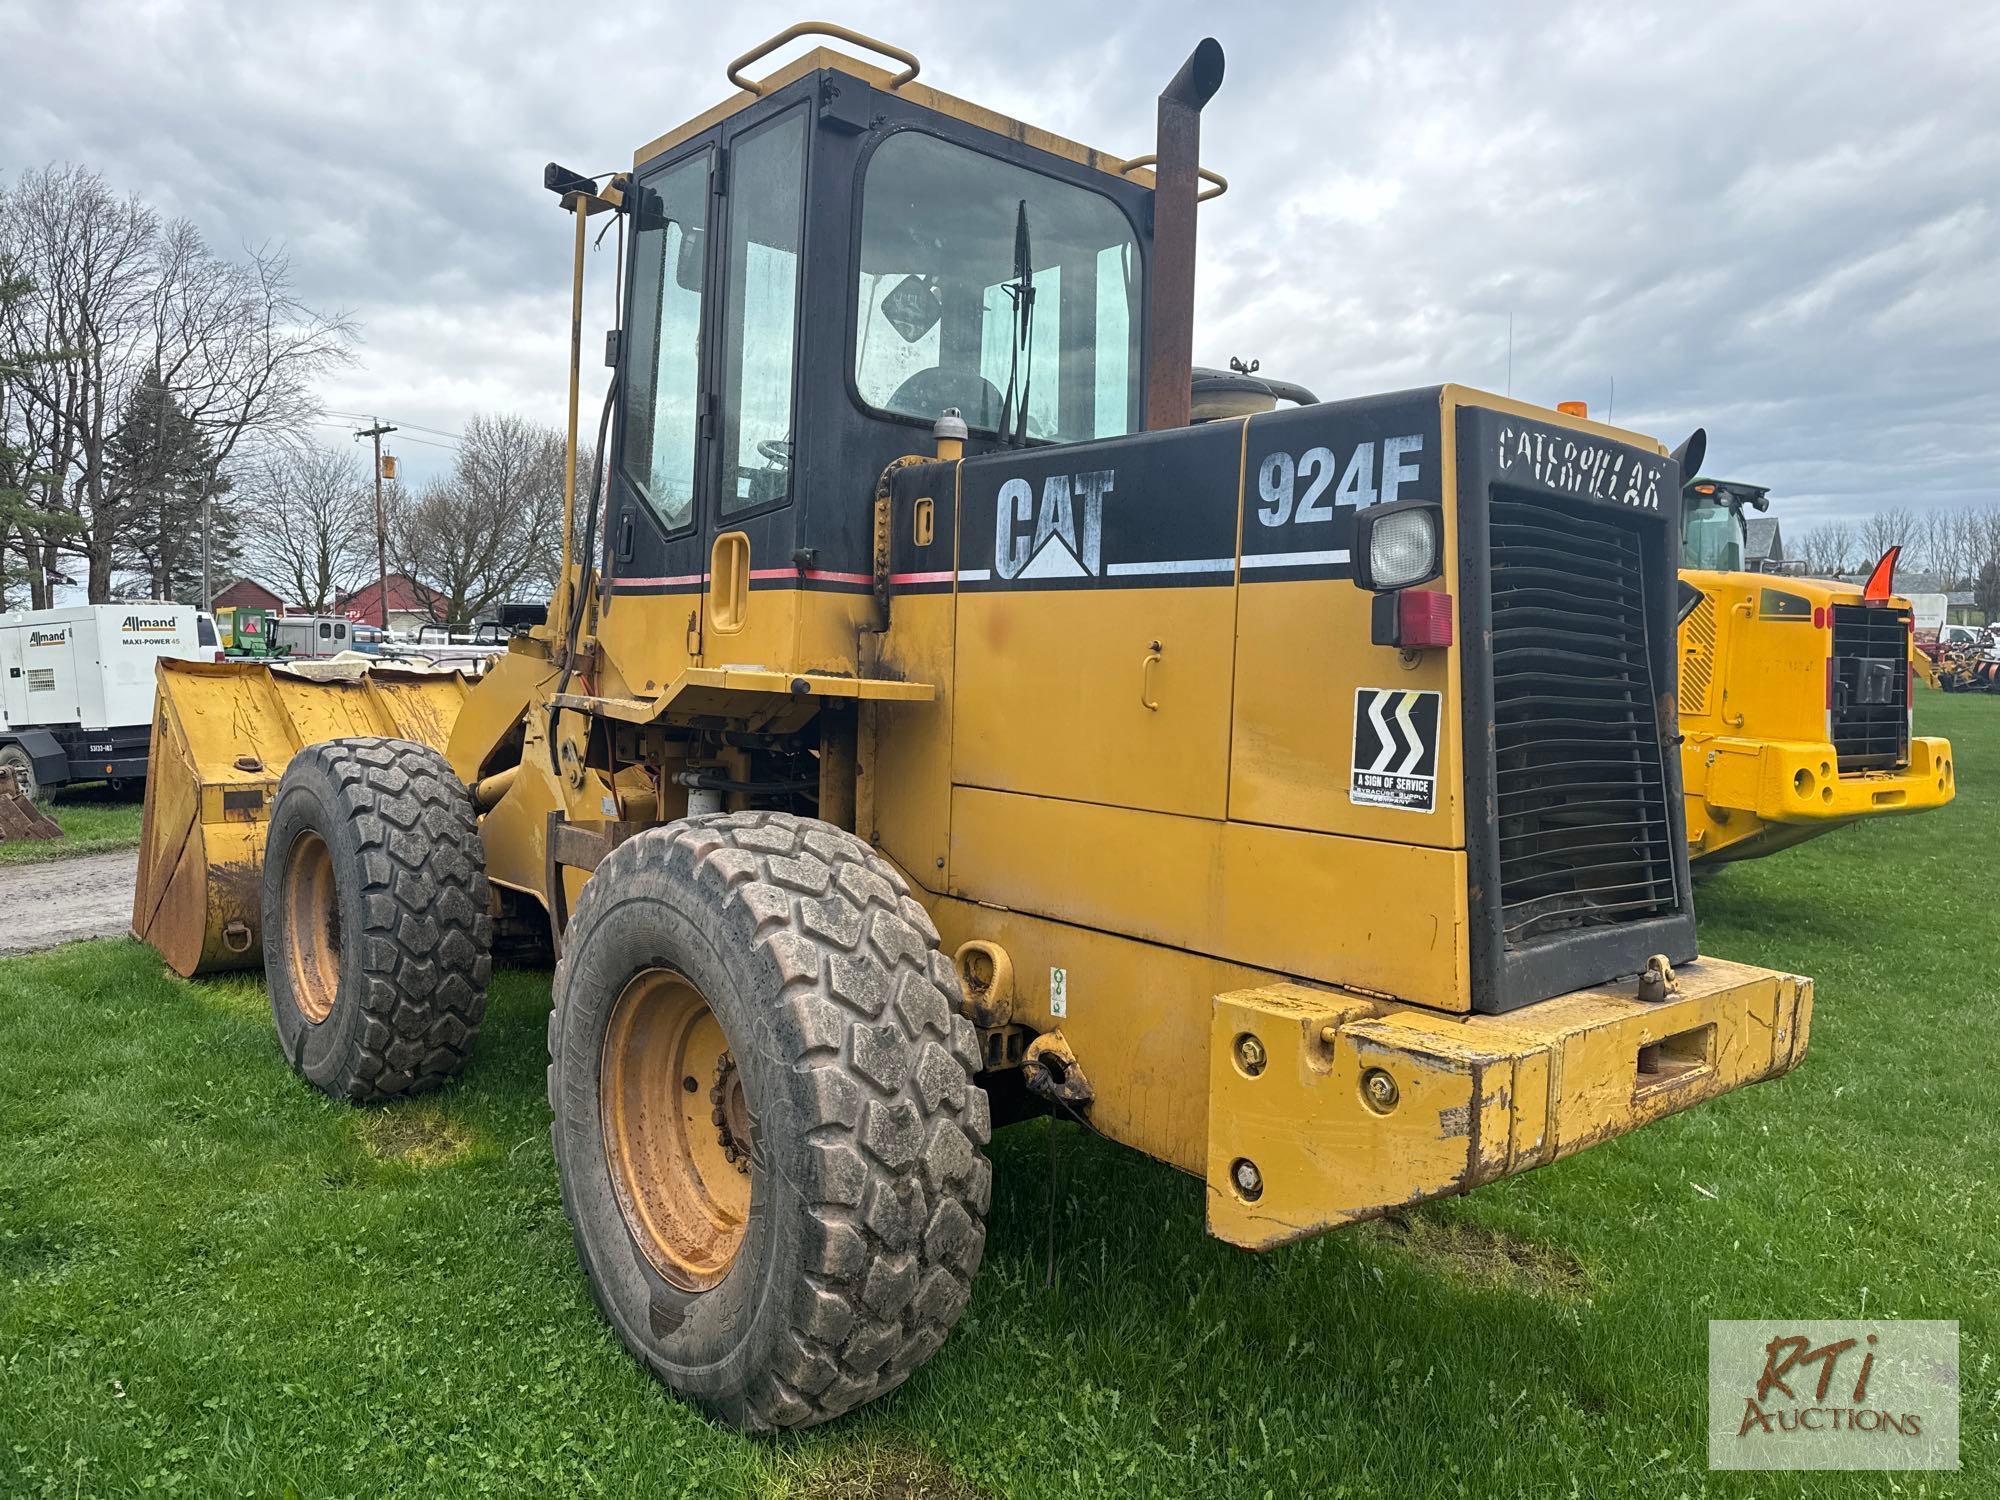 Caterpillar 924F articulated loader, hydraulic coupler, GP bucket, enclosed cab, 17.5R25 tires, rear